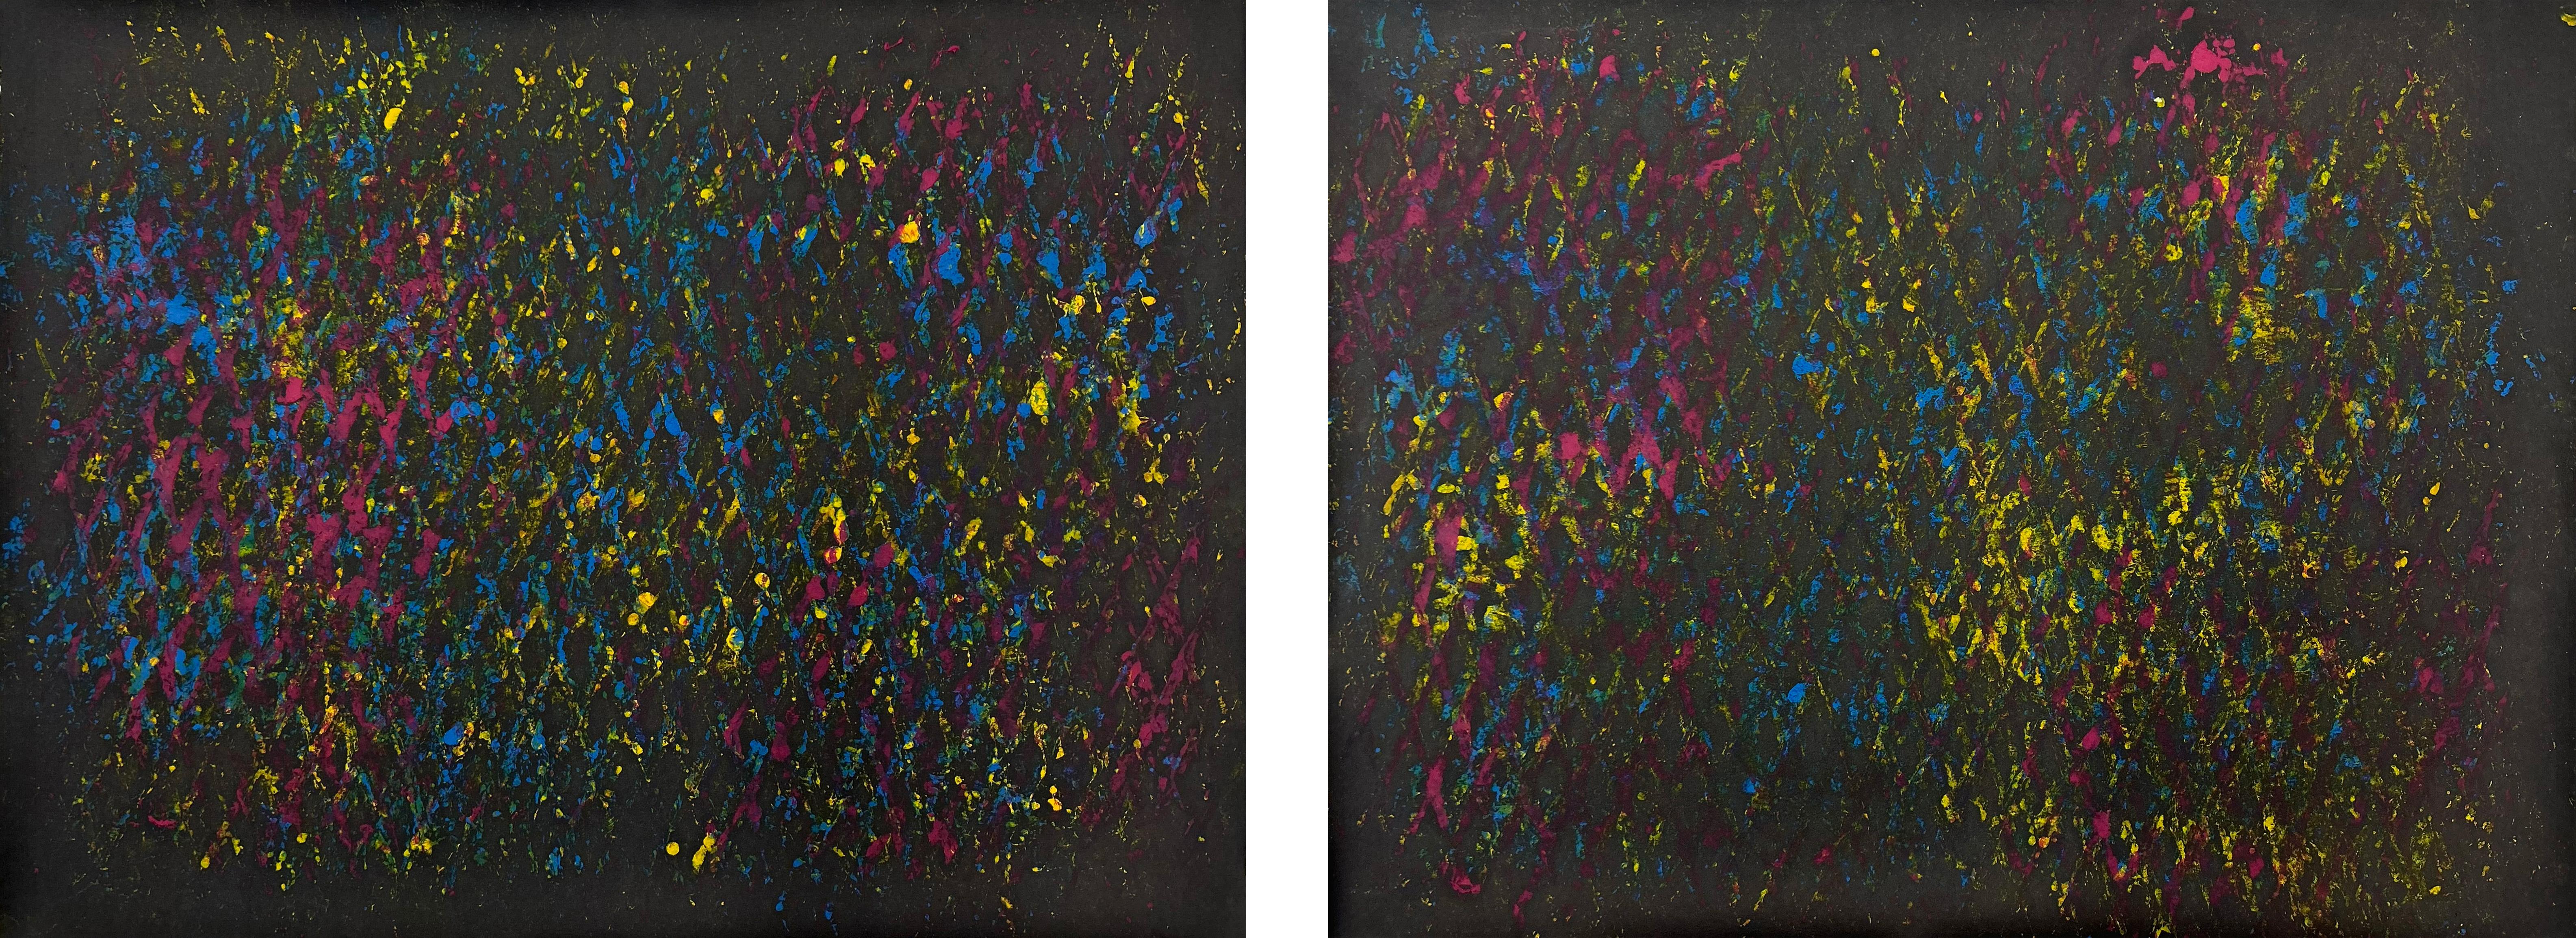 Clemens Wolf Abstract Painting - CMYK I and II, Expanded Metal Painting. Diptych